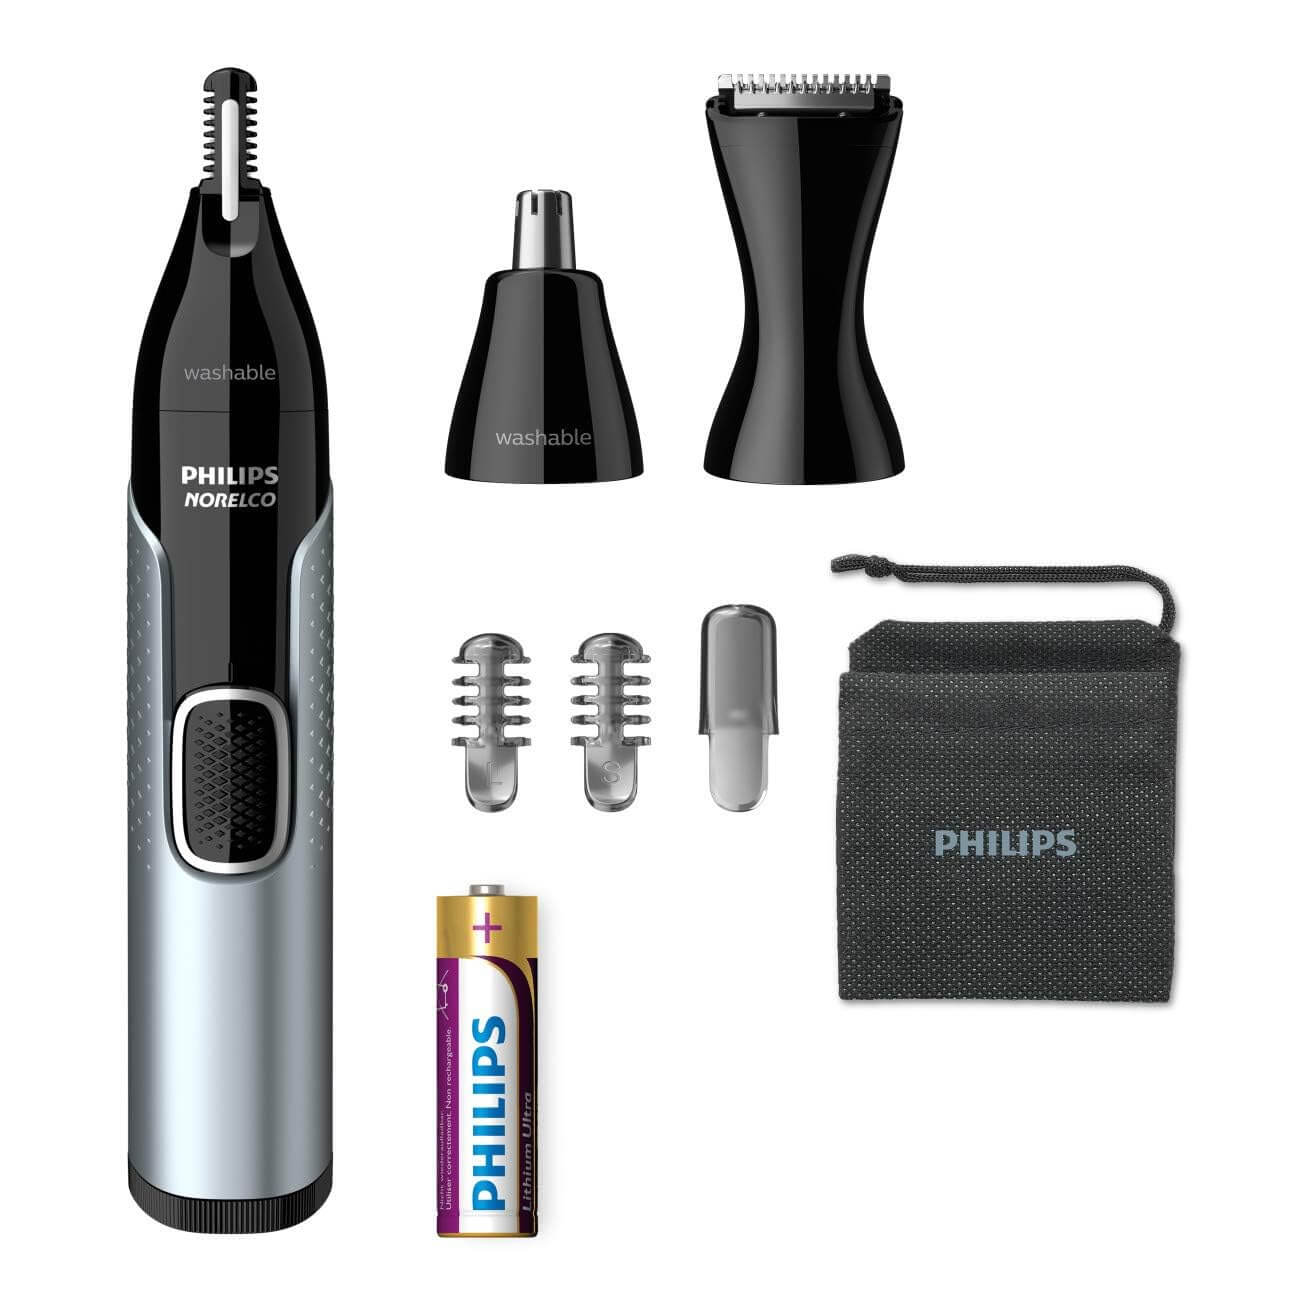 Philips Norelco Nose Hair Trimmer 5000